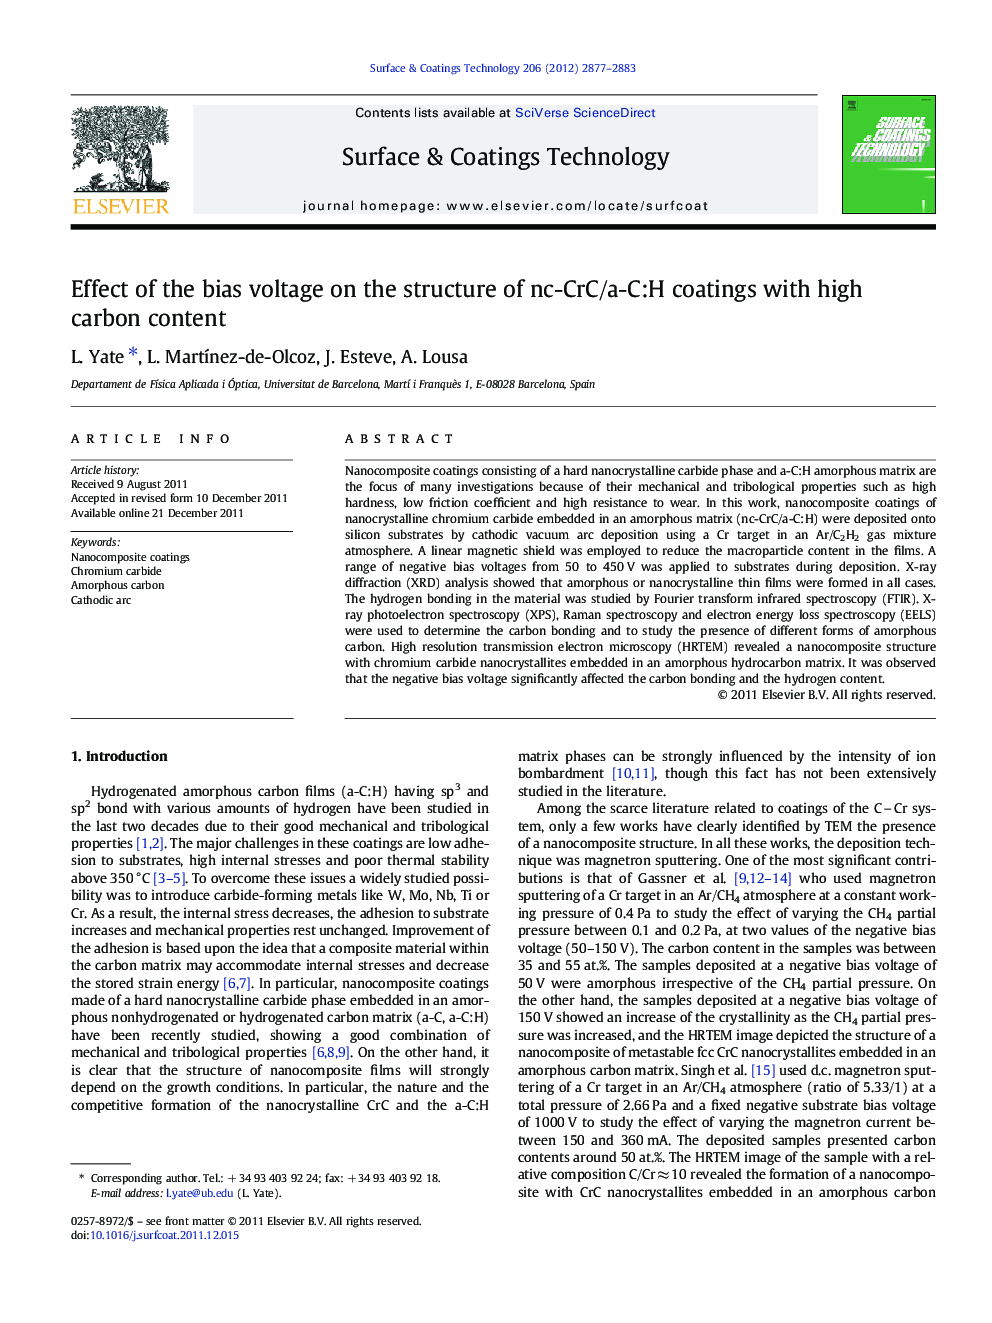 Effect of the bias voltage on the structure of nc-CrC/a-C:H coatings with high carbon content